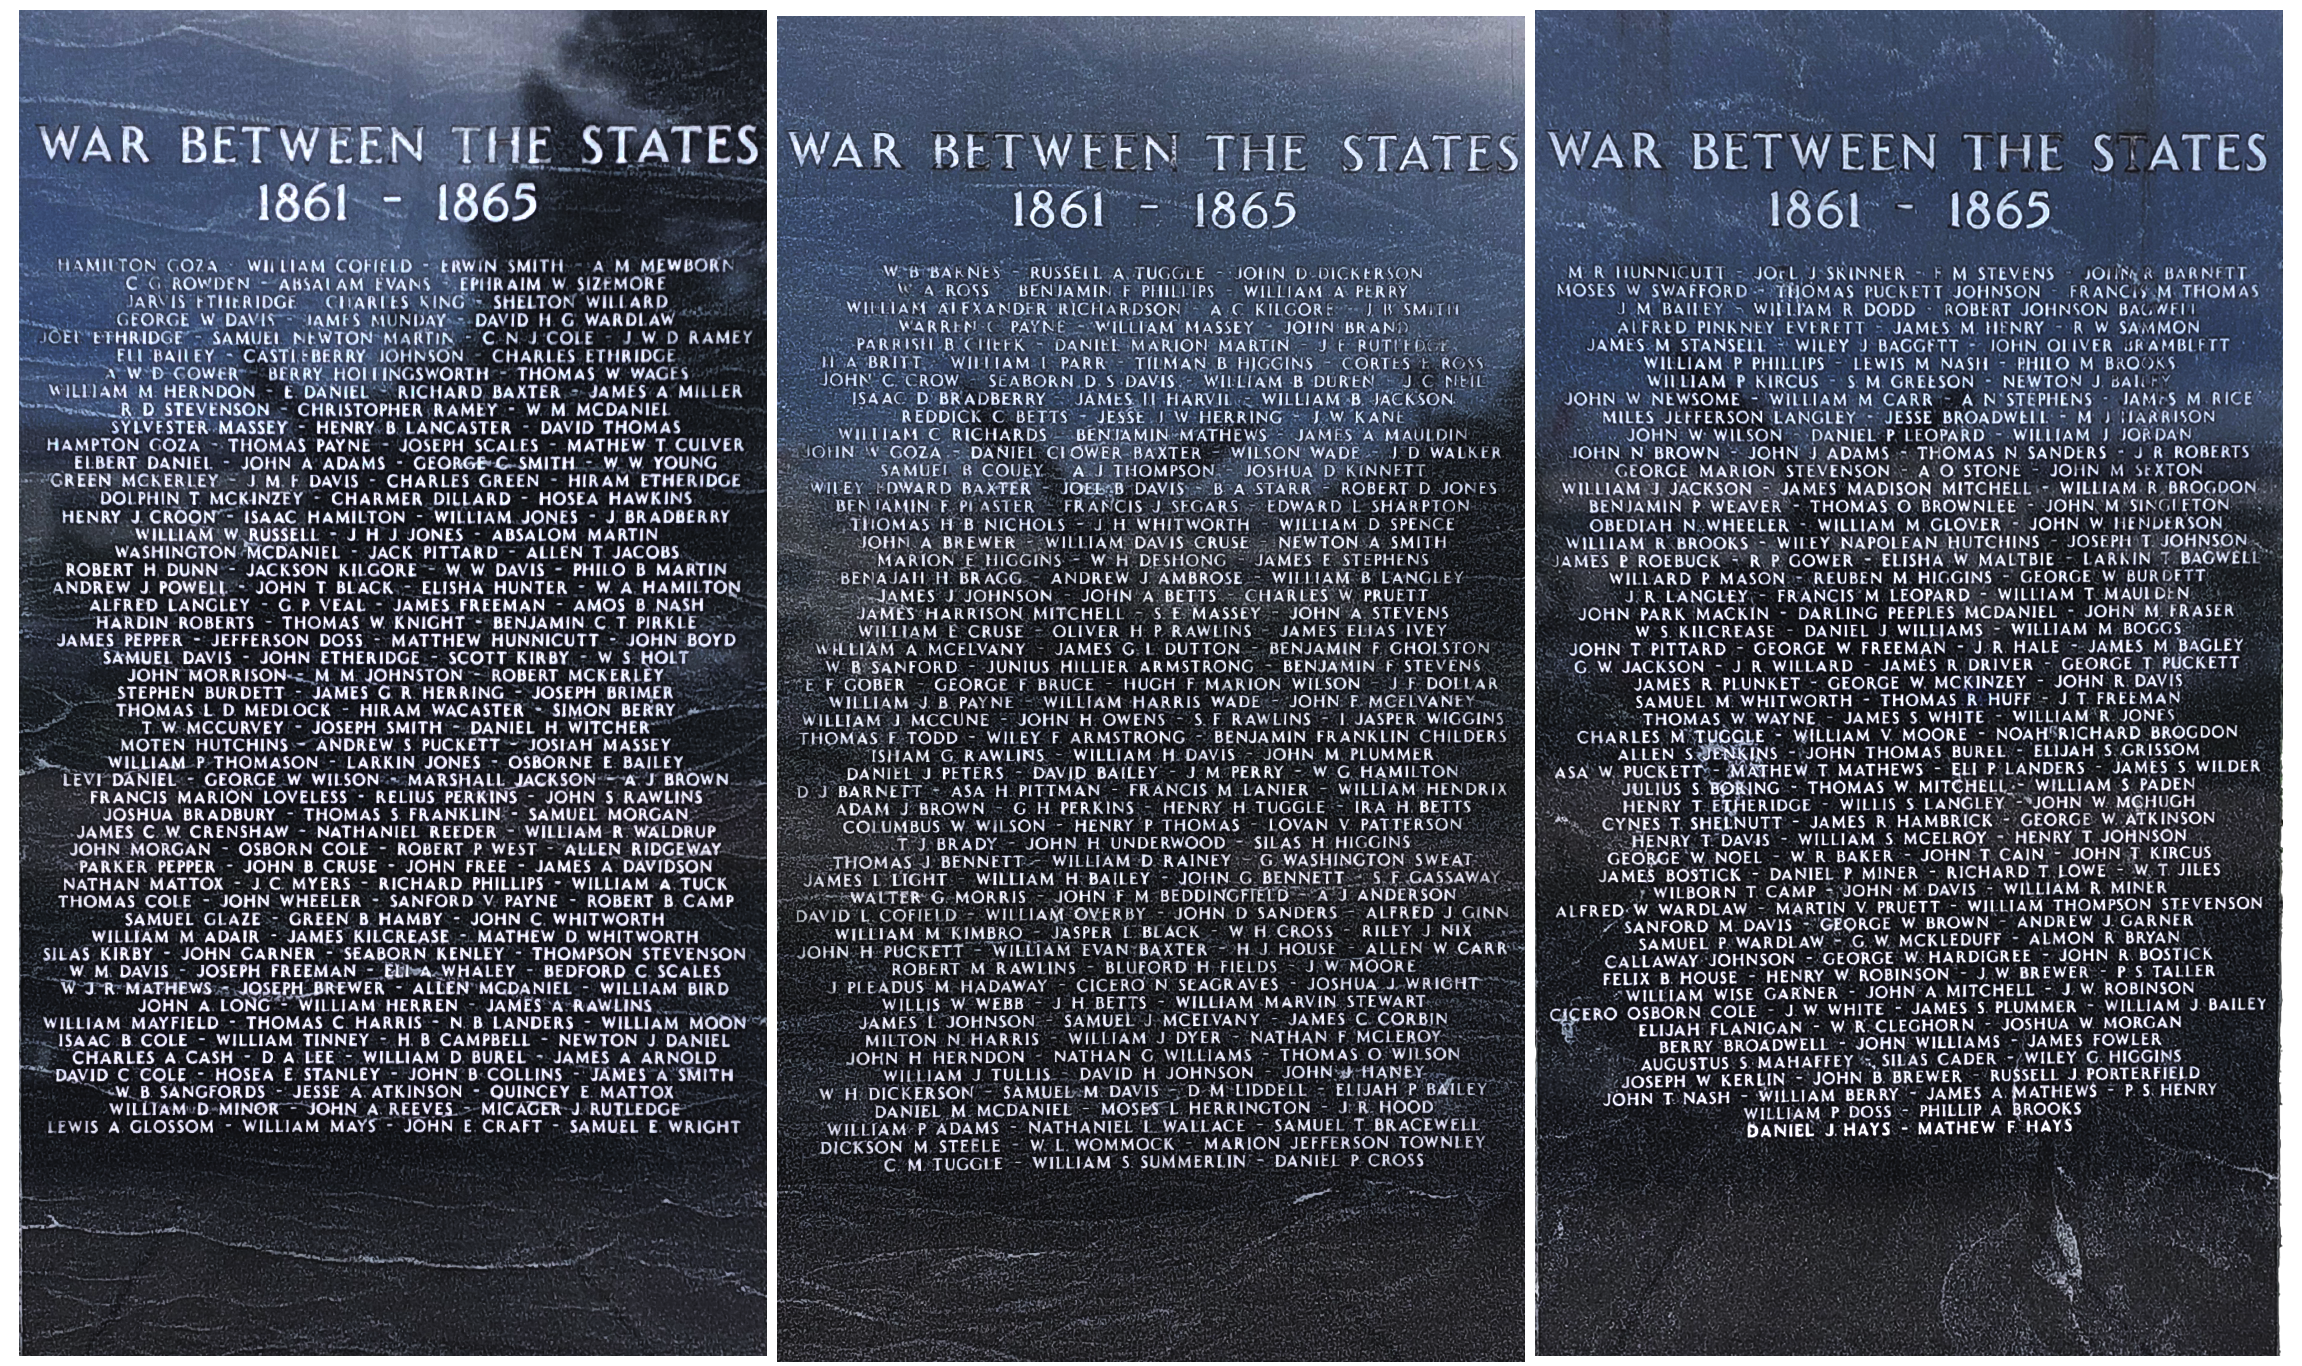 Image of Markers representing those lost during the American Civil War.